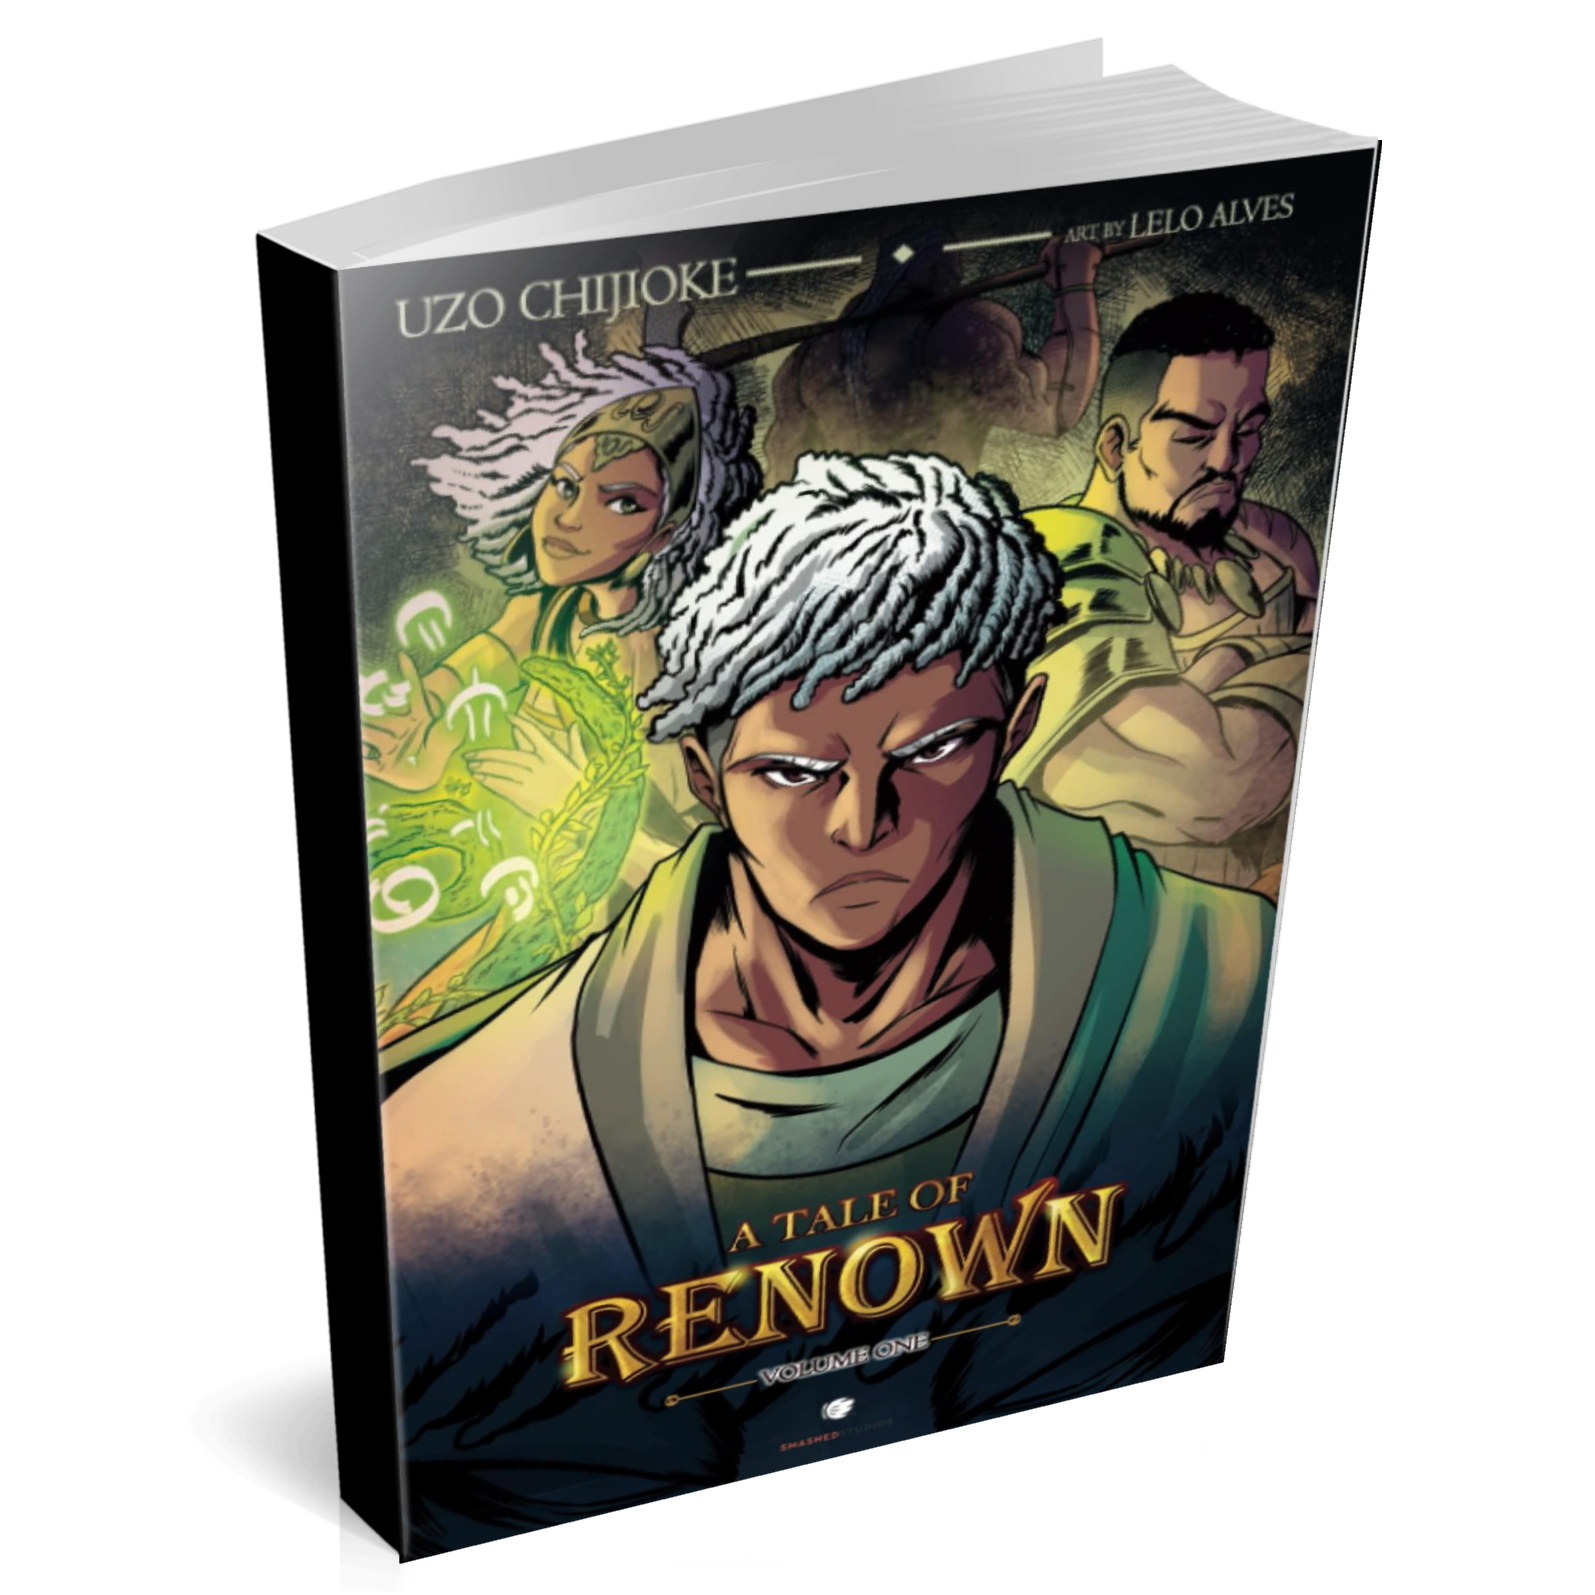 "A Tale of Renown: Volume One" by Uzo Chijioke Launches to Rave Reviews